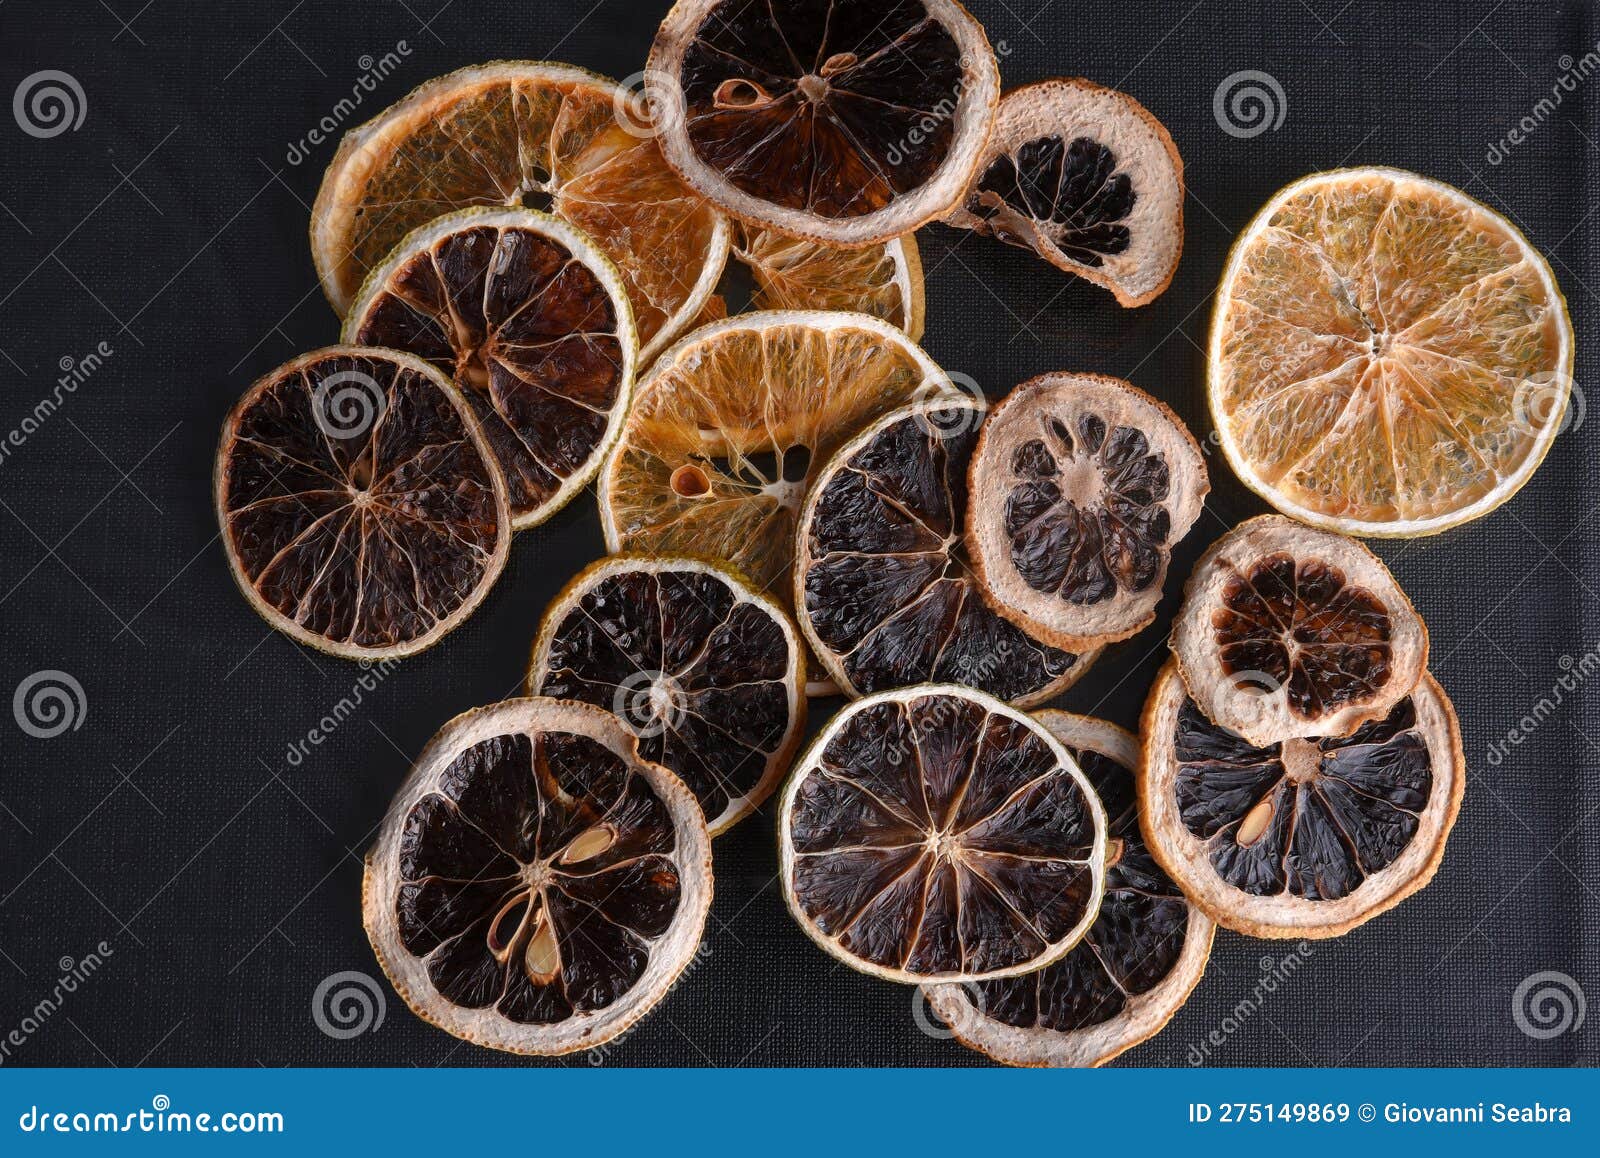 lemon and orange dehydrated and dried for use in drinks and sweets